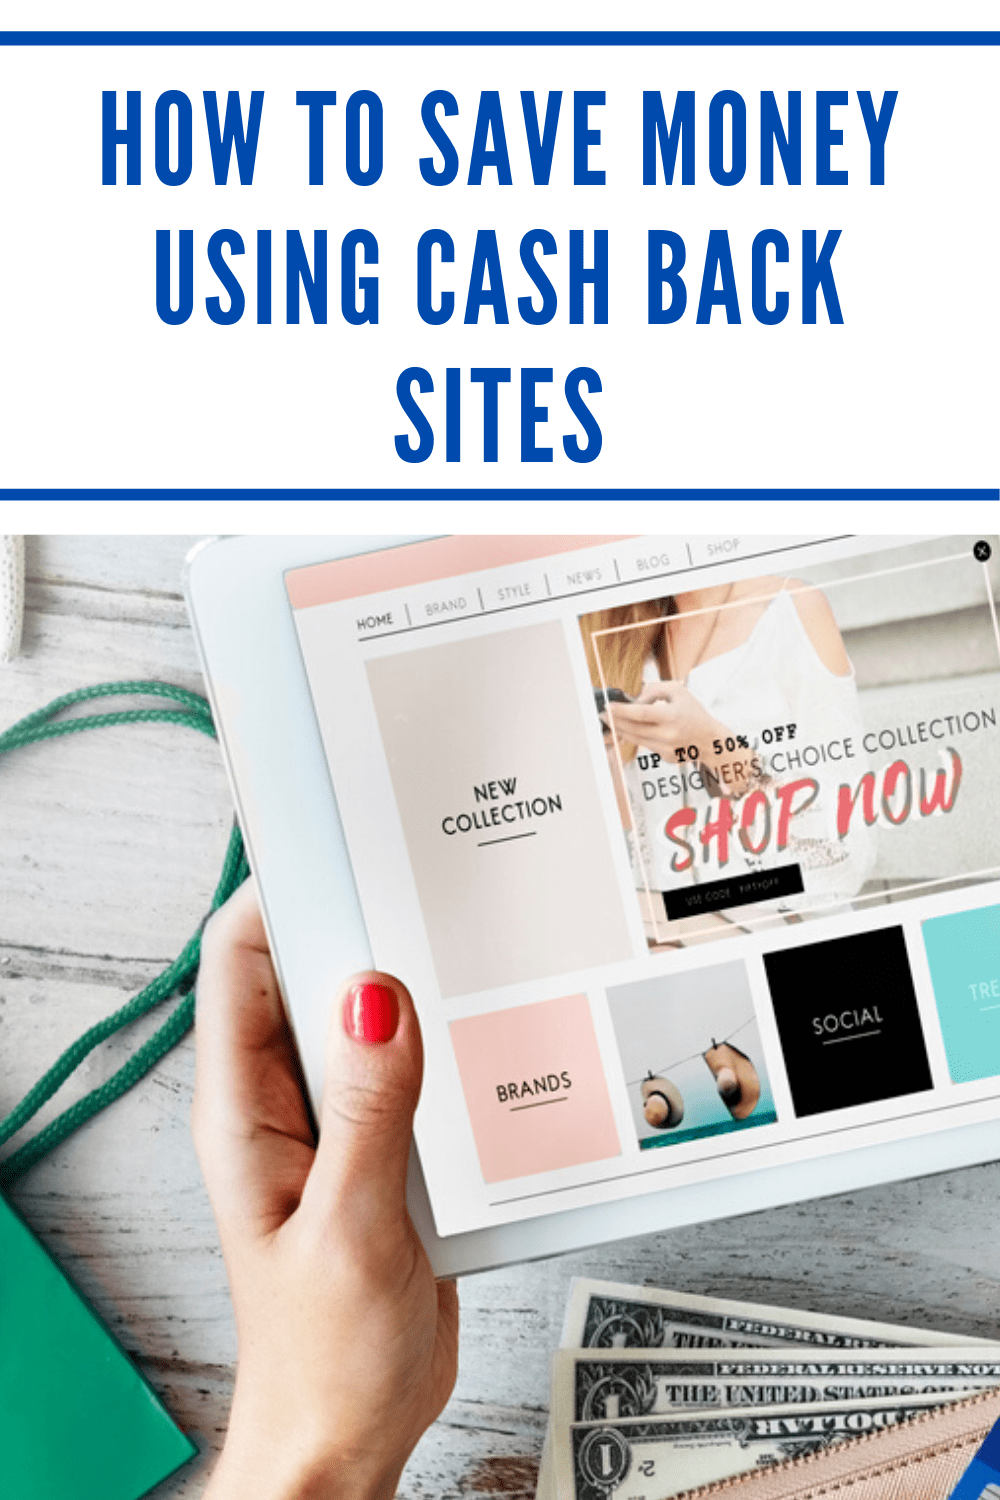 How to save money using cash back sites